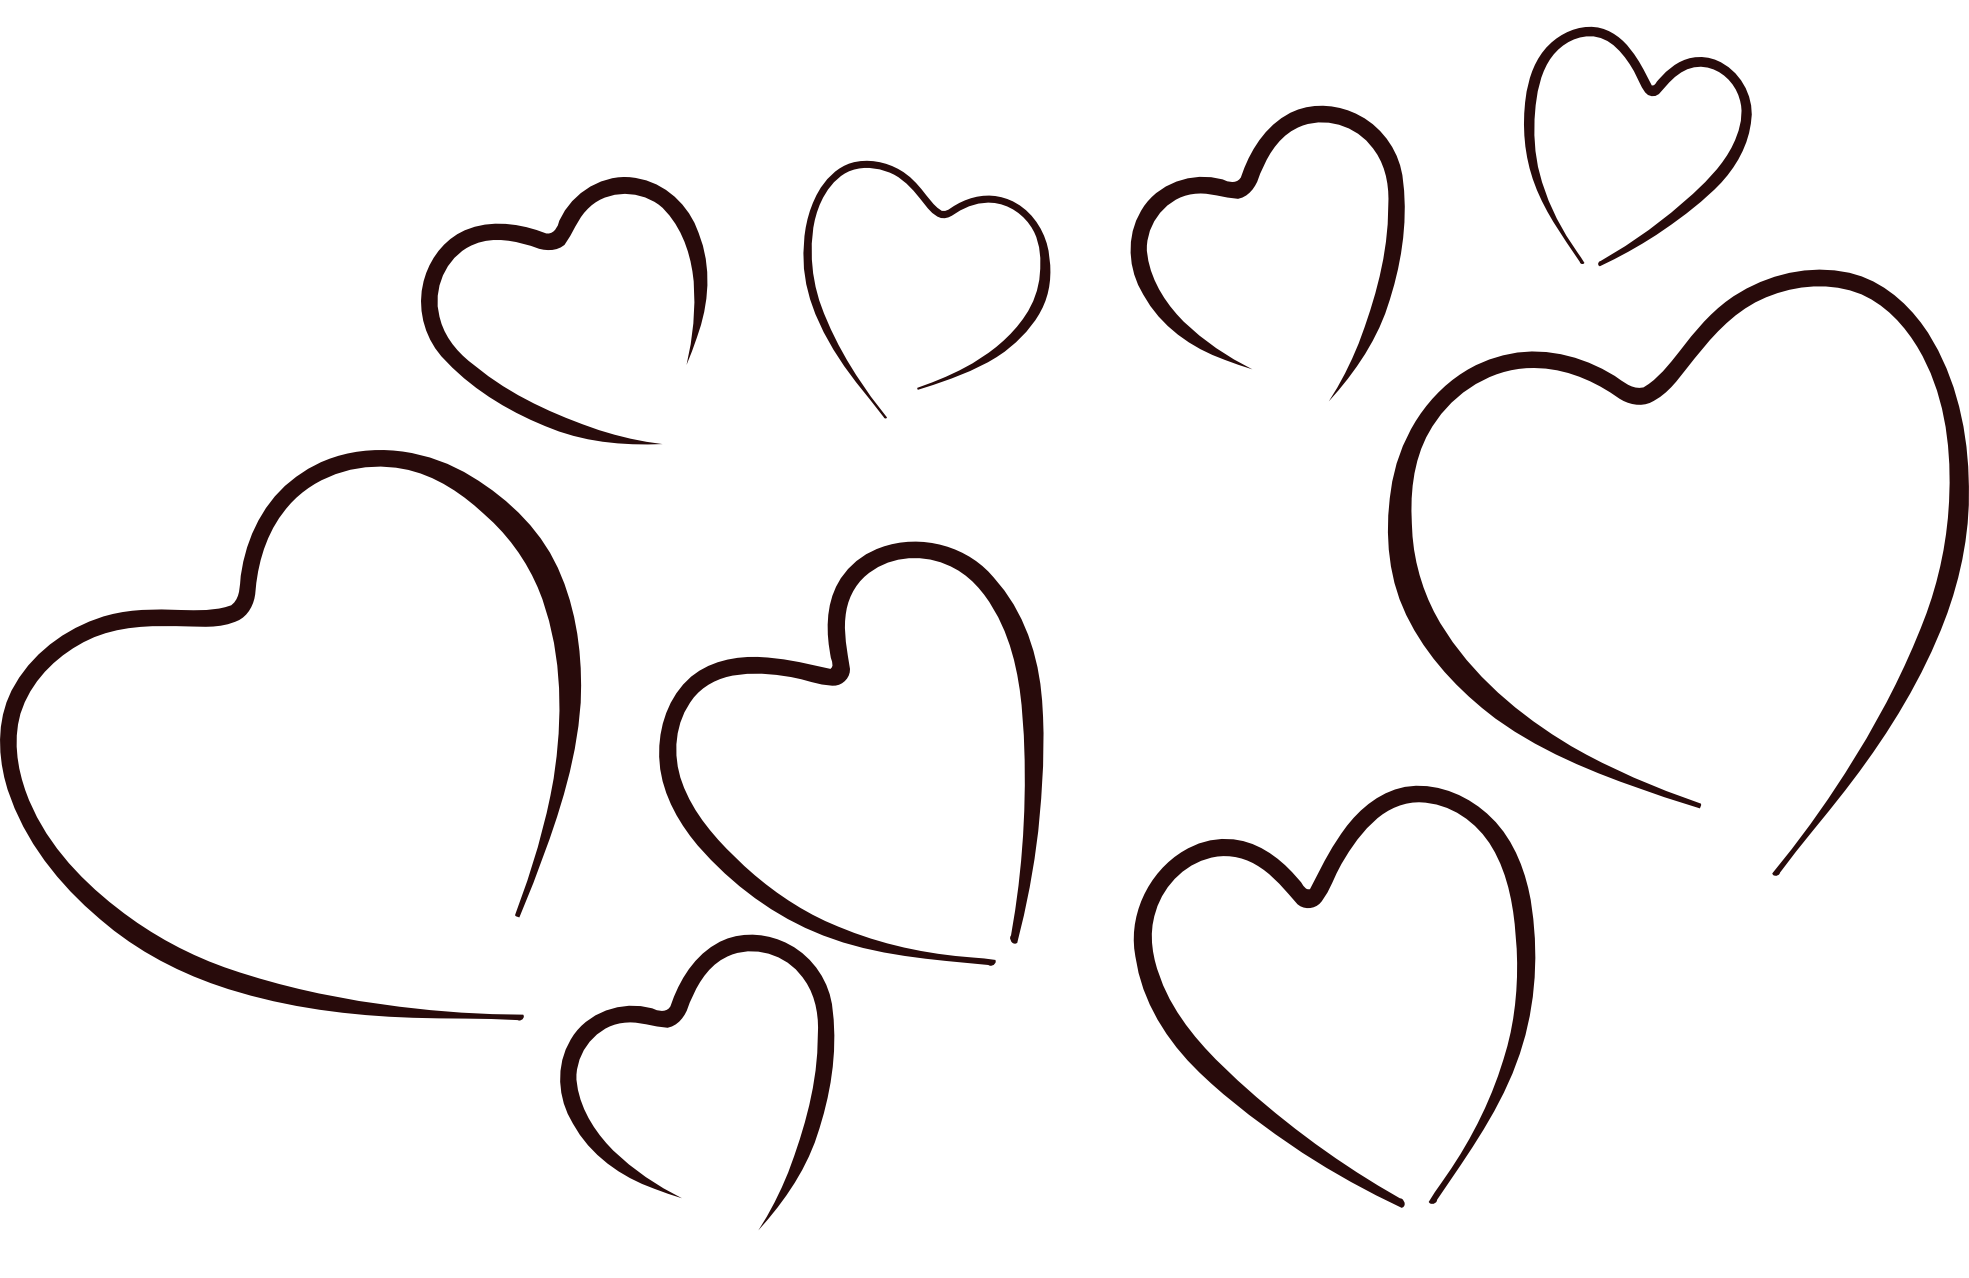 Heart black and white row of hearts clipart black and white